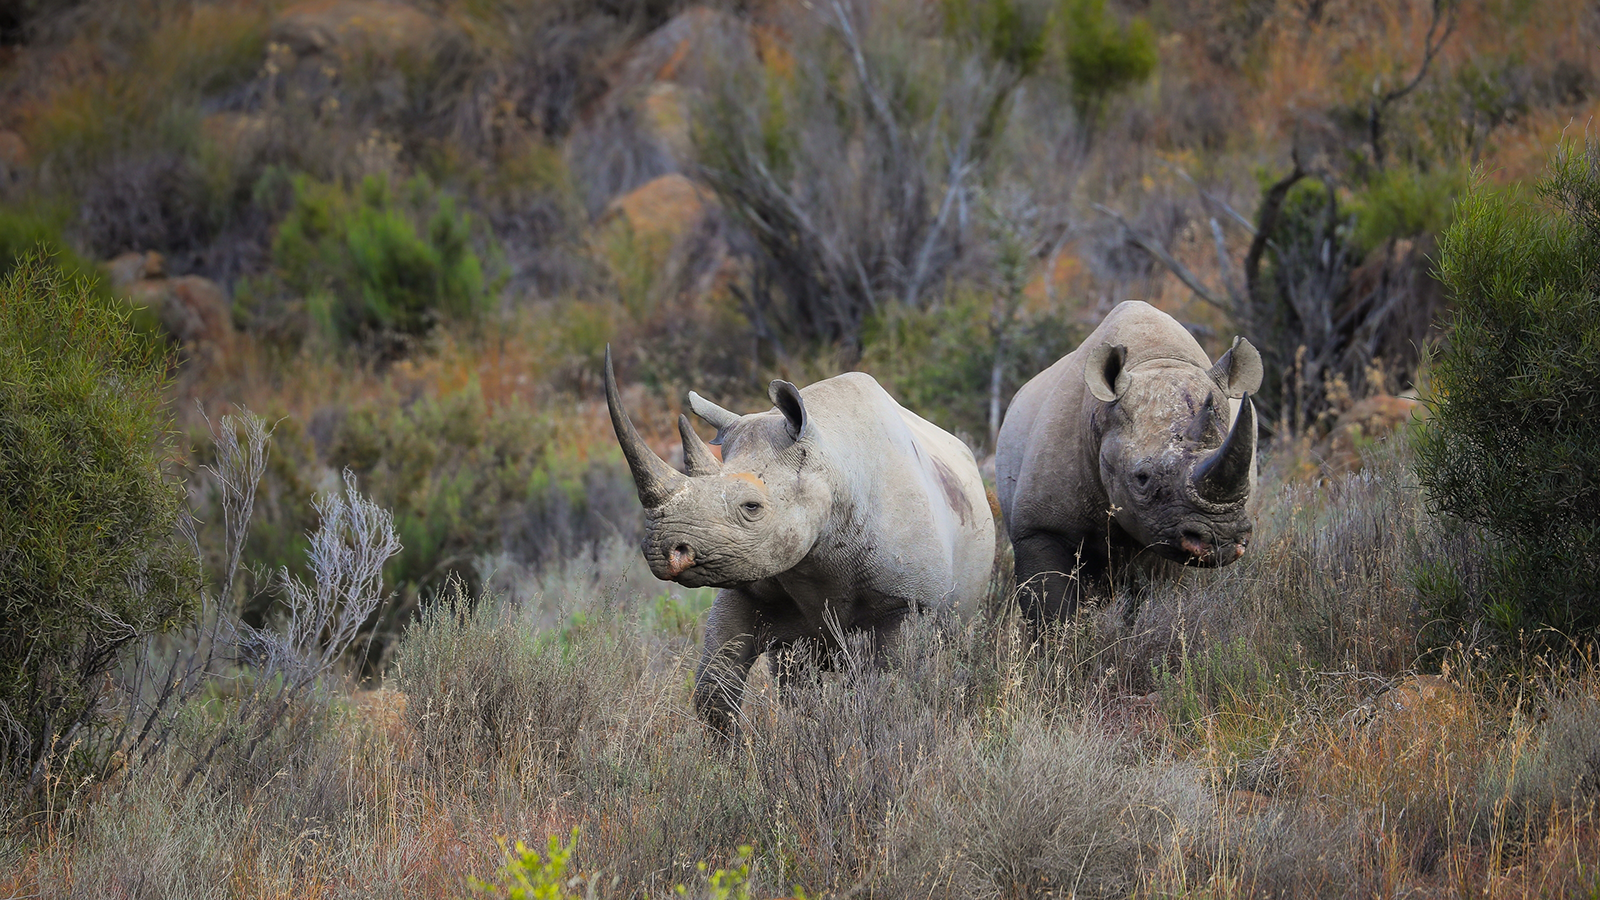 Rhino horns injected with trackable radioactive material to deter smugglers